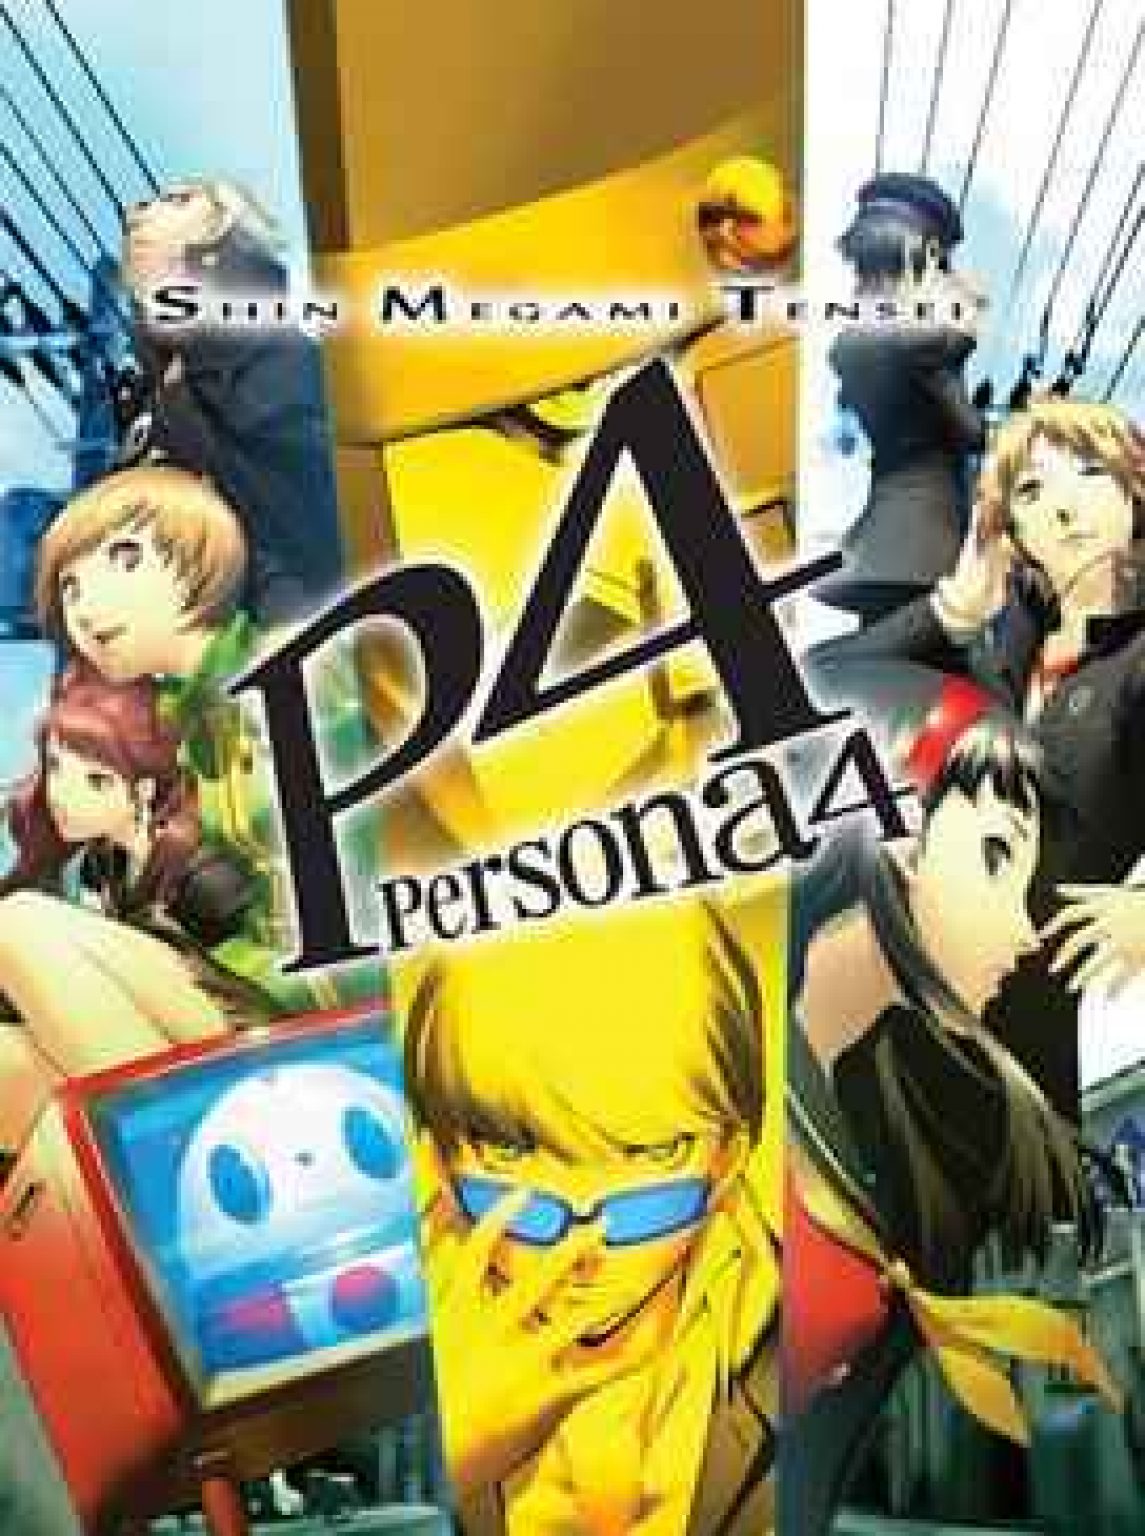 persona 4 golden save editor pc